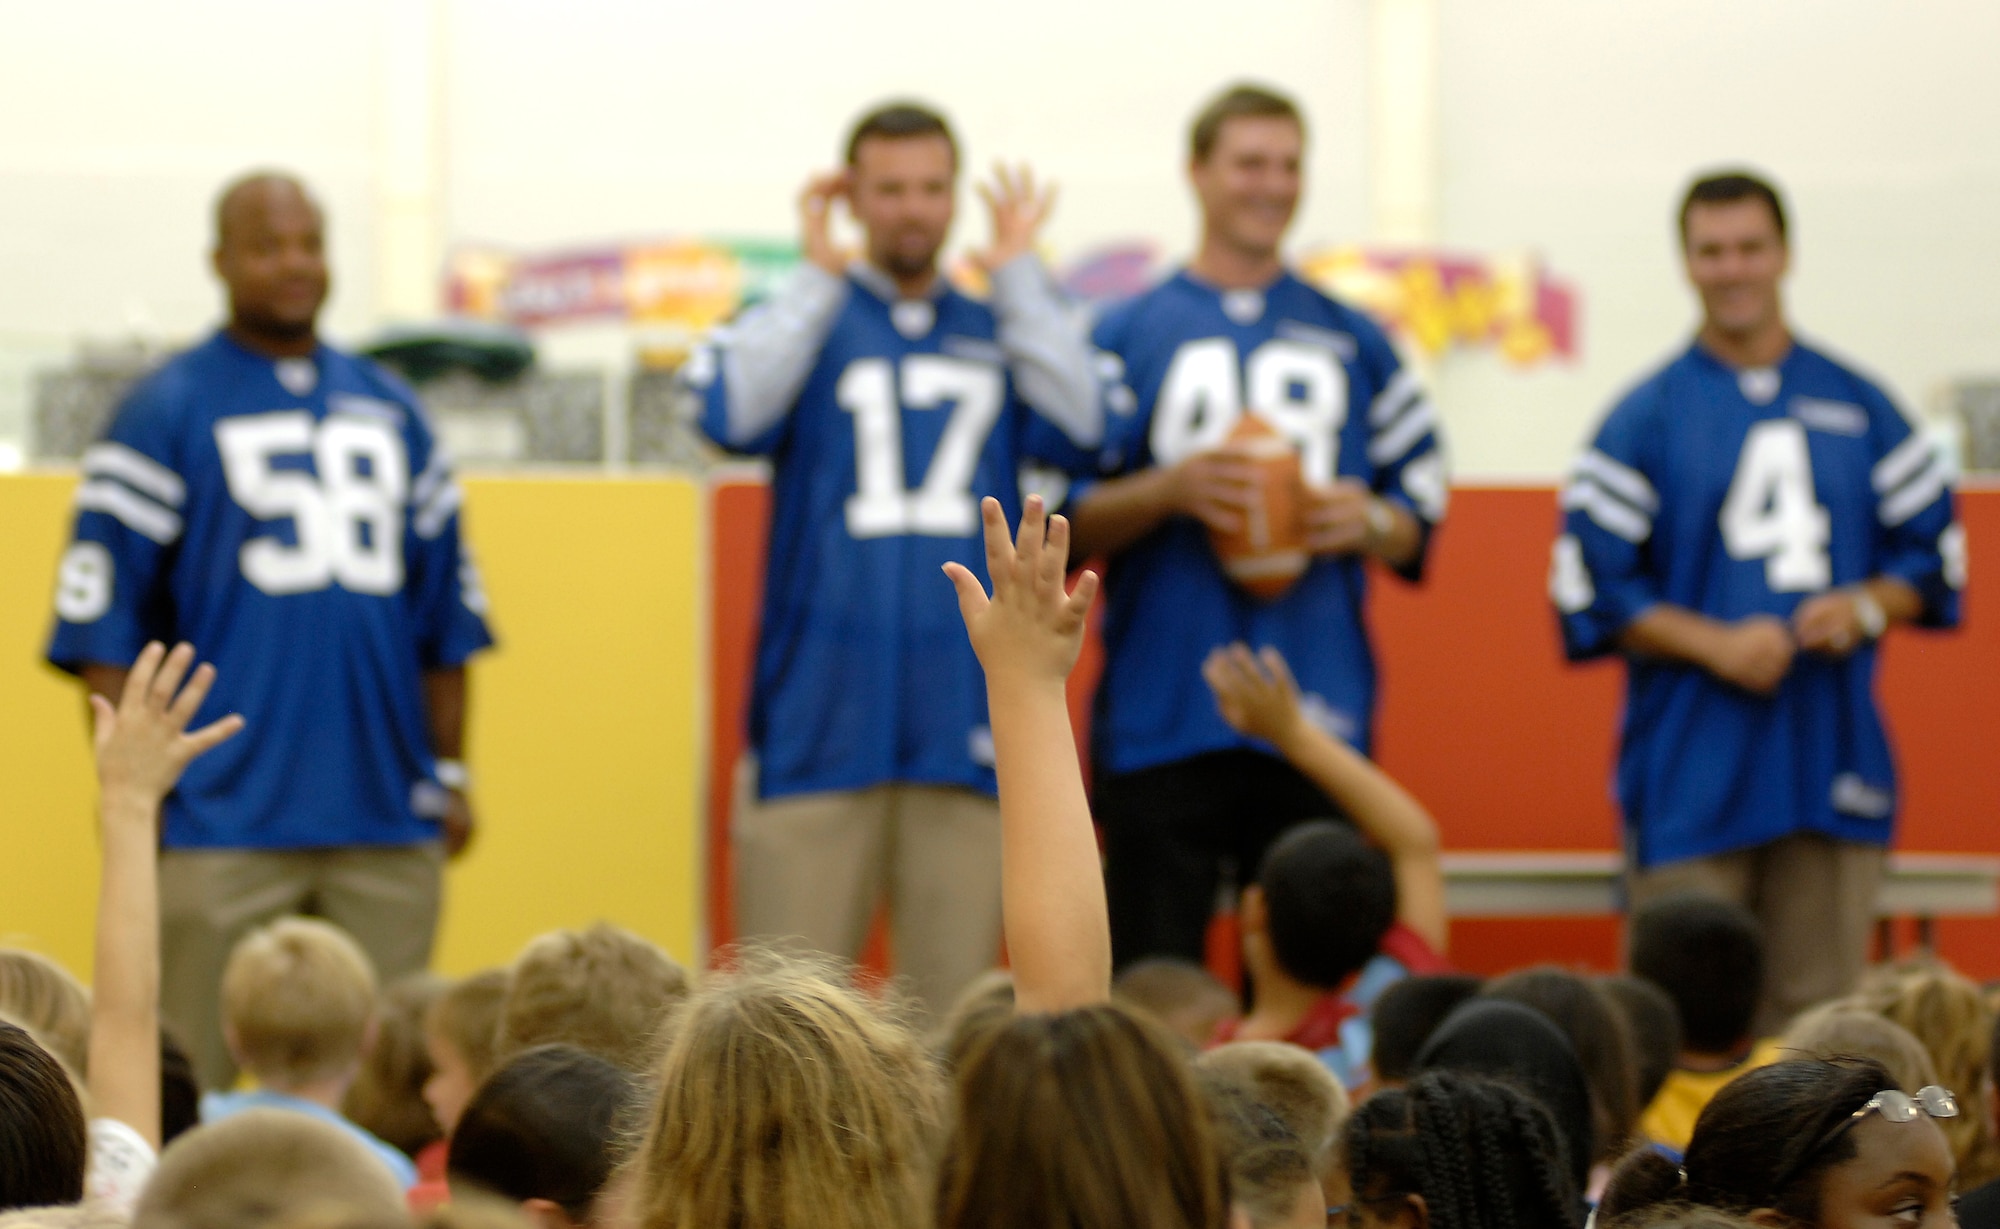 Indianapolis Colts (from left to right) Gary Brackett, Hunter Smith, Justin Snow and Adam Vinatieri answer questions at Randolph Elementary School on Randolph Air Force Base, Texas, June 1. The team members spent the day visiting with base personnel and school children, enhancing the already strong relationship between the team and the Air Force.  (U.S. Air Force photo/Staff Sgt. Brian Ferguson)
